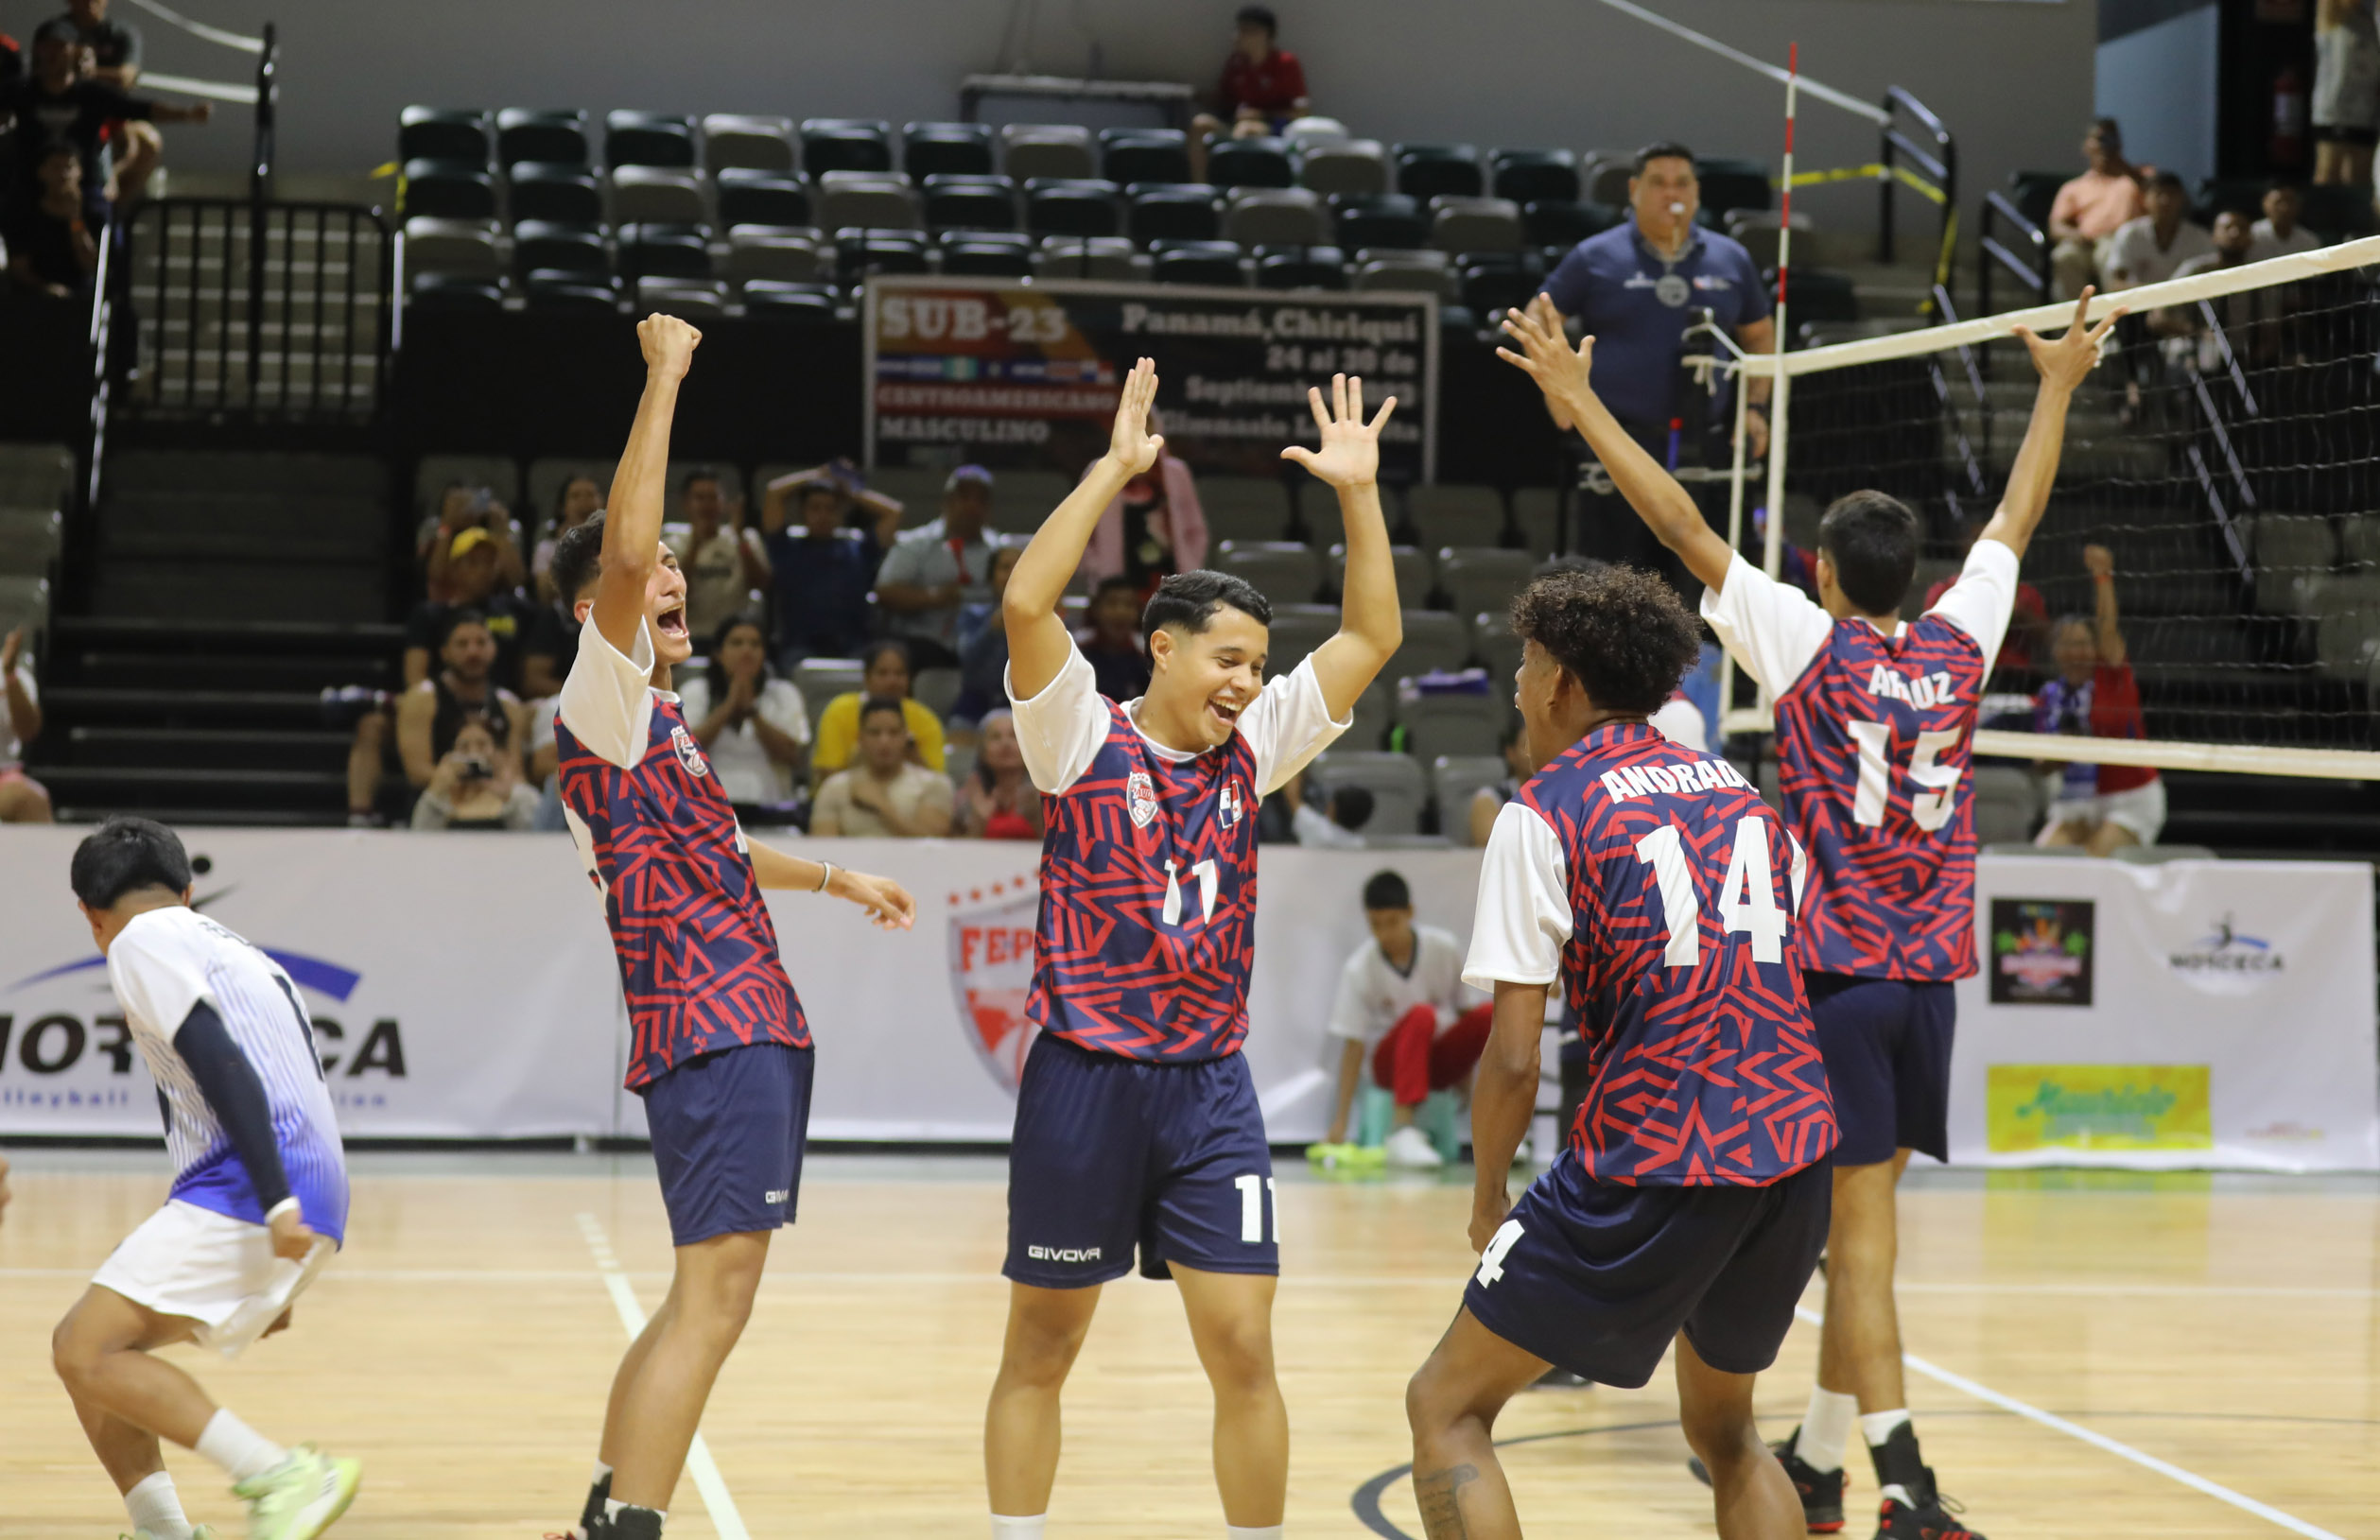 Panama opens with a four set victory over Honduras